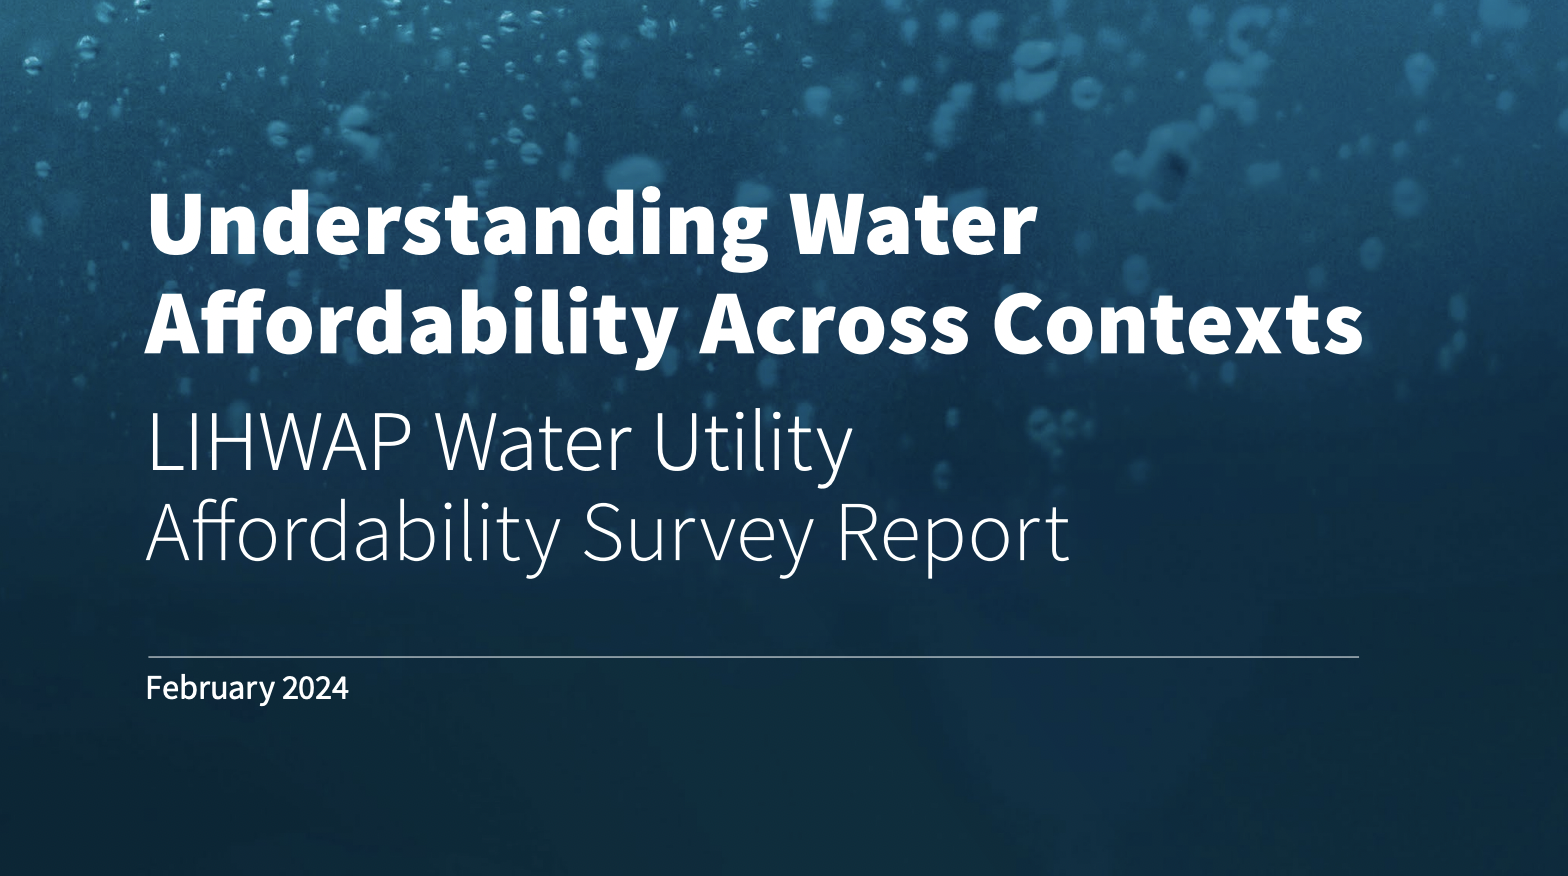 Large Scale Water Utility Affordability Survey Report